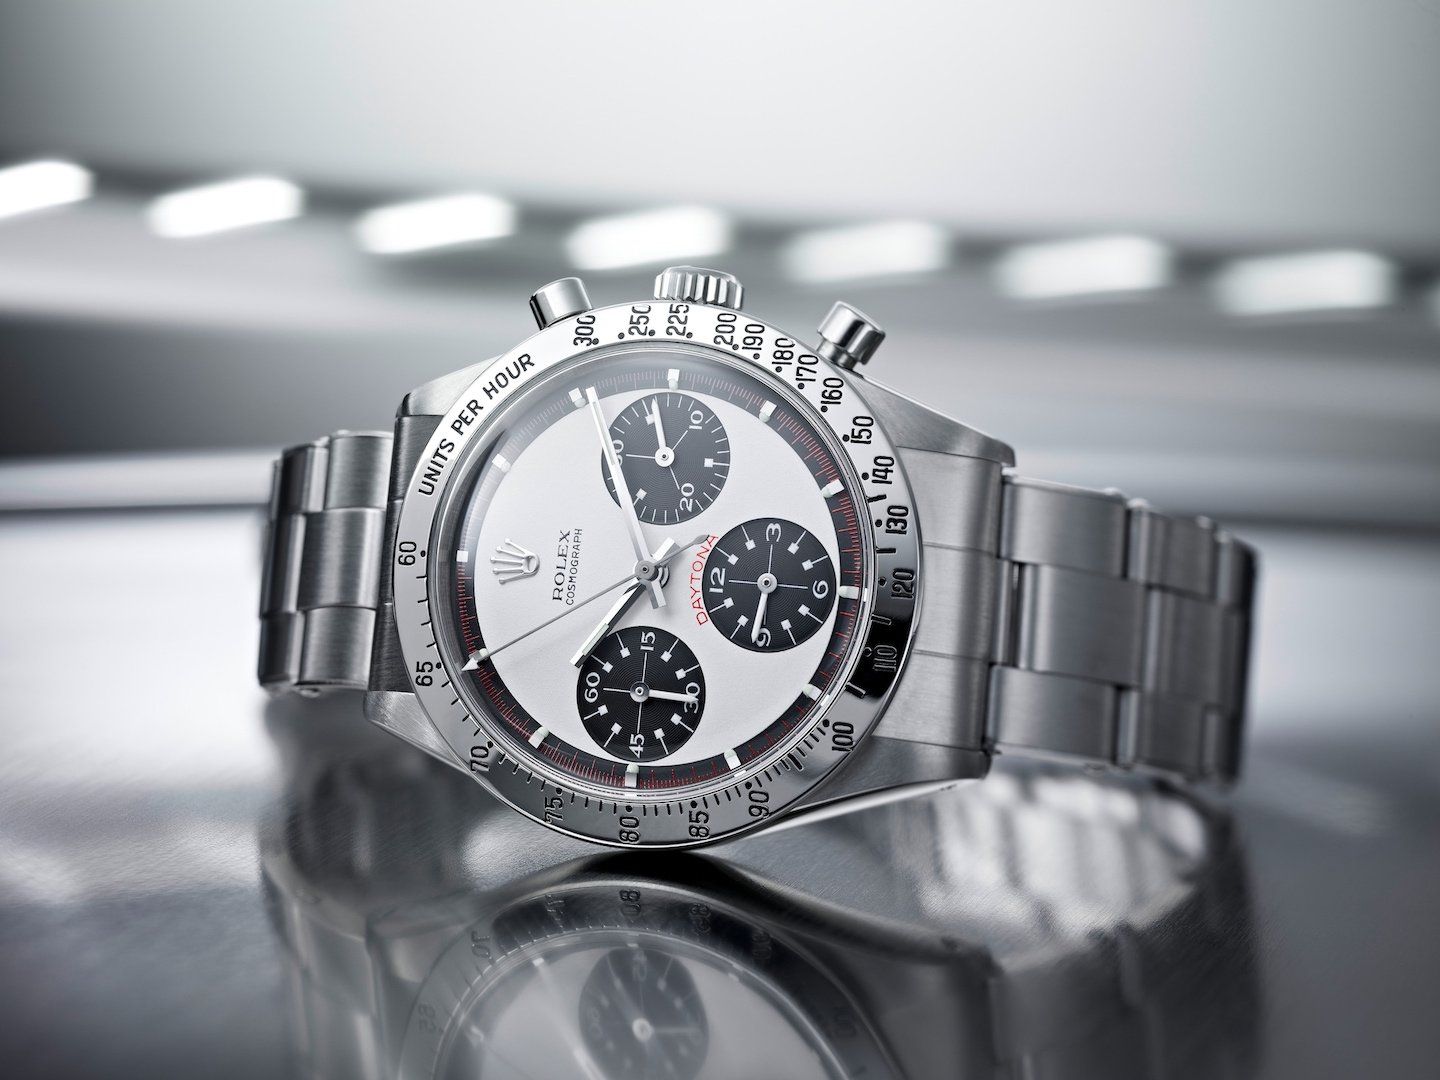 The cosmograph daytona with what is known as the ‘Paul Newman’ Dial  